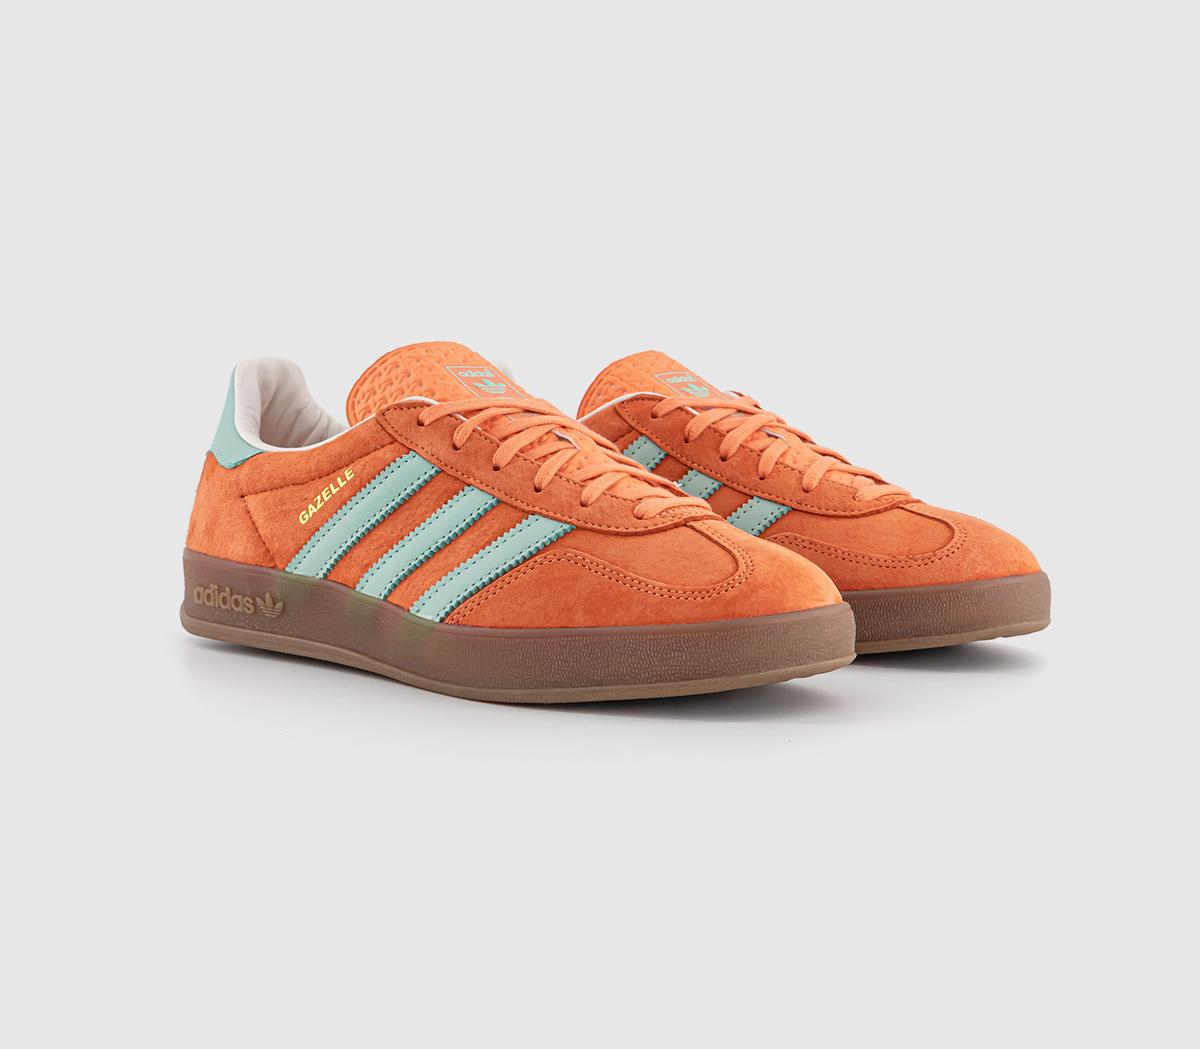 Adidas Gazelle Indoor Trainers Easy Orange Clear Mint Gum Red, 6